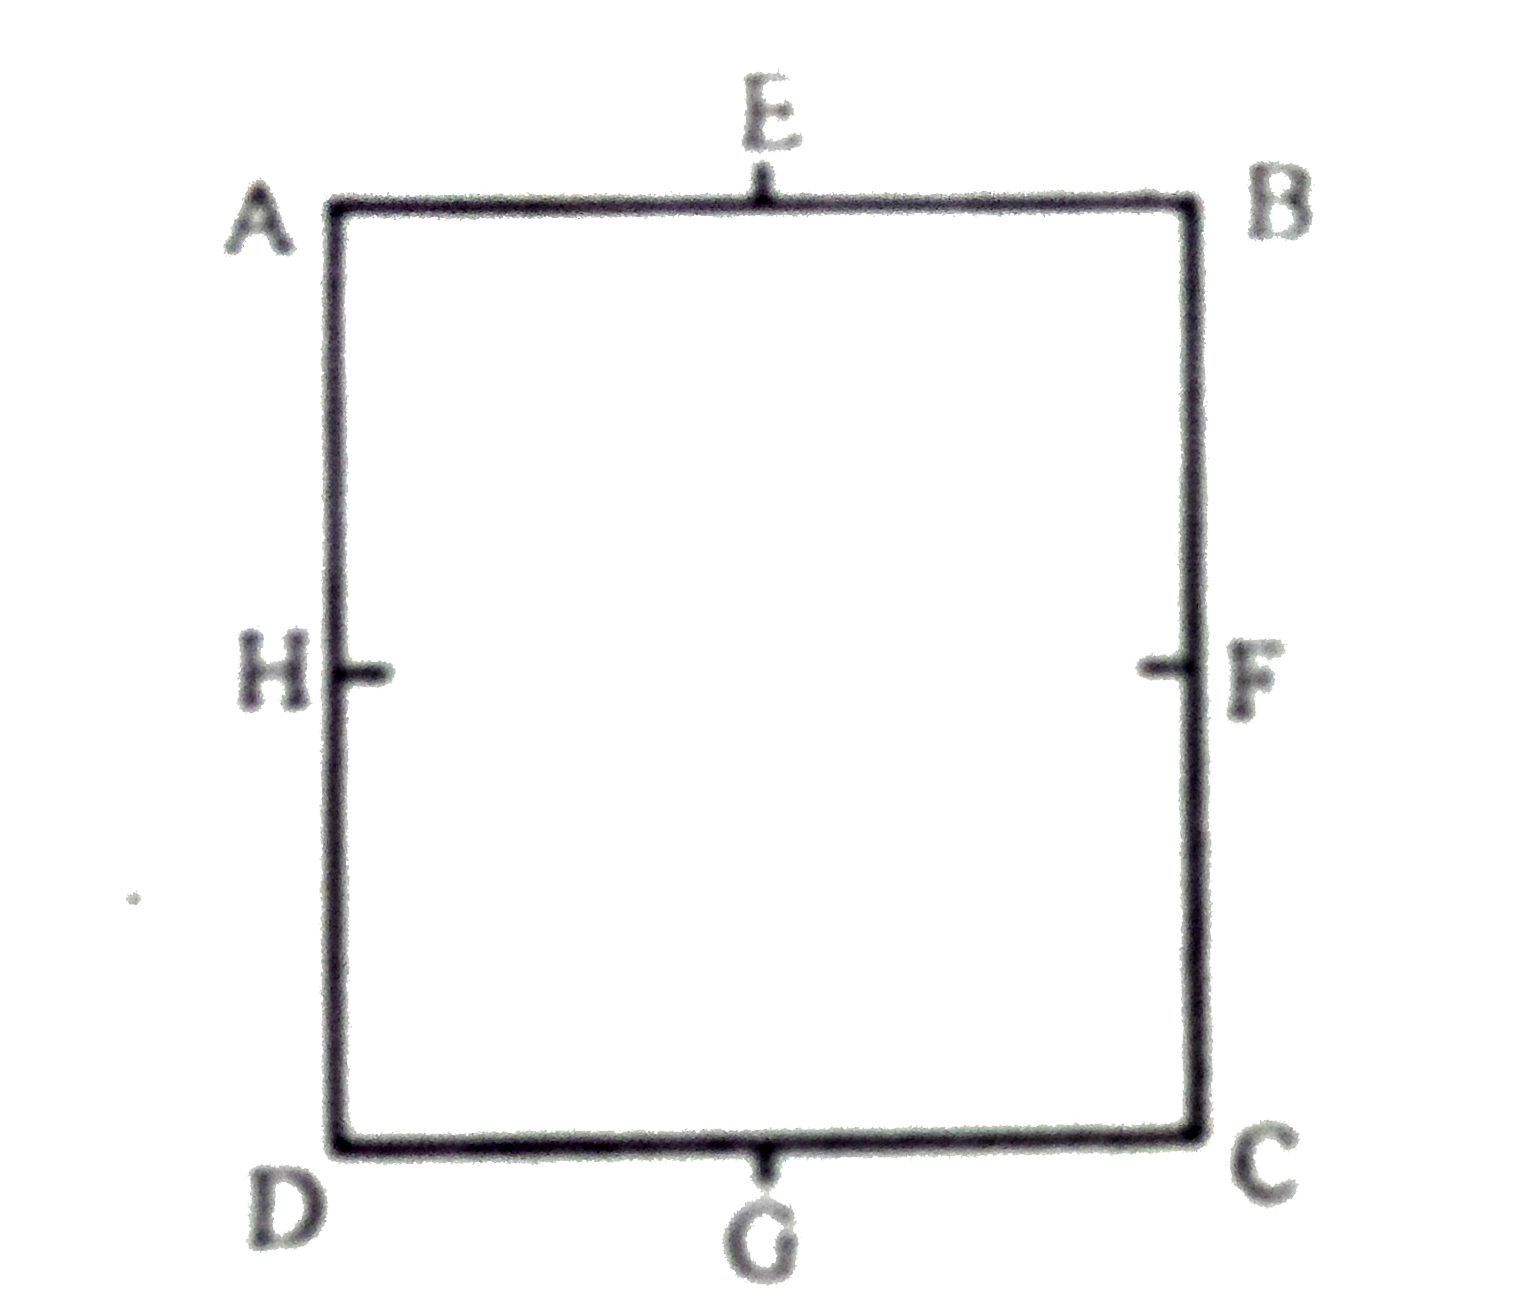 In a rectangle ABCD (BC=2AB). The moment of inertia along which axis will  be minimum        A. EG B. HF C. BD D. BC